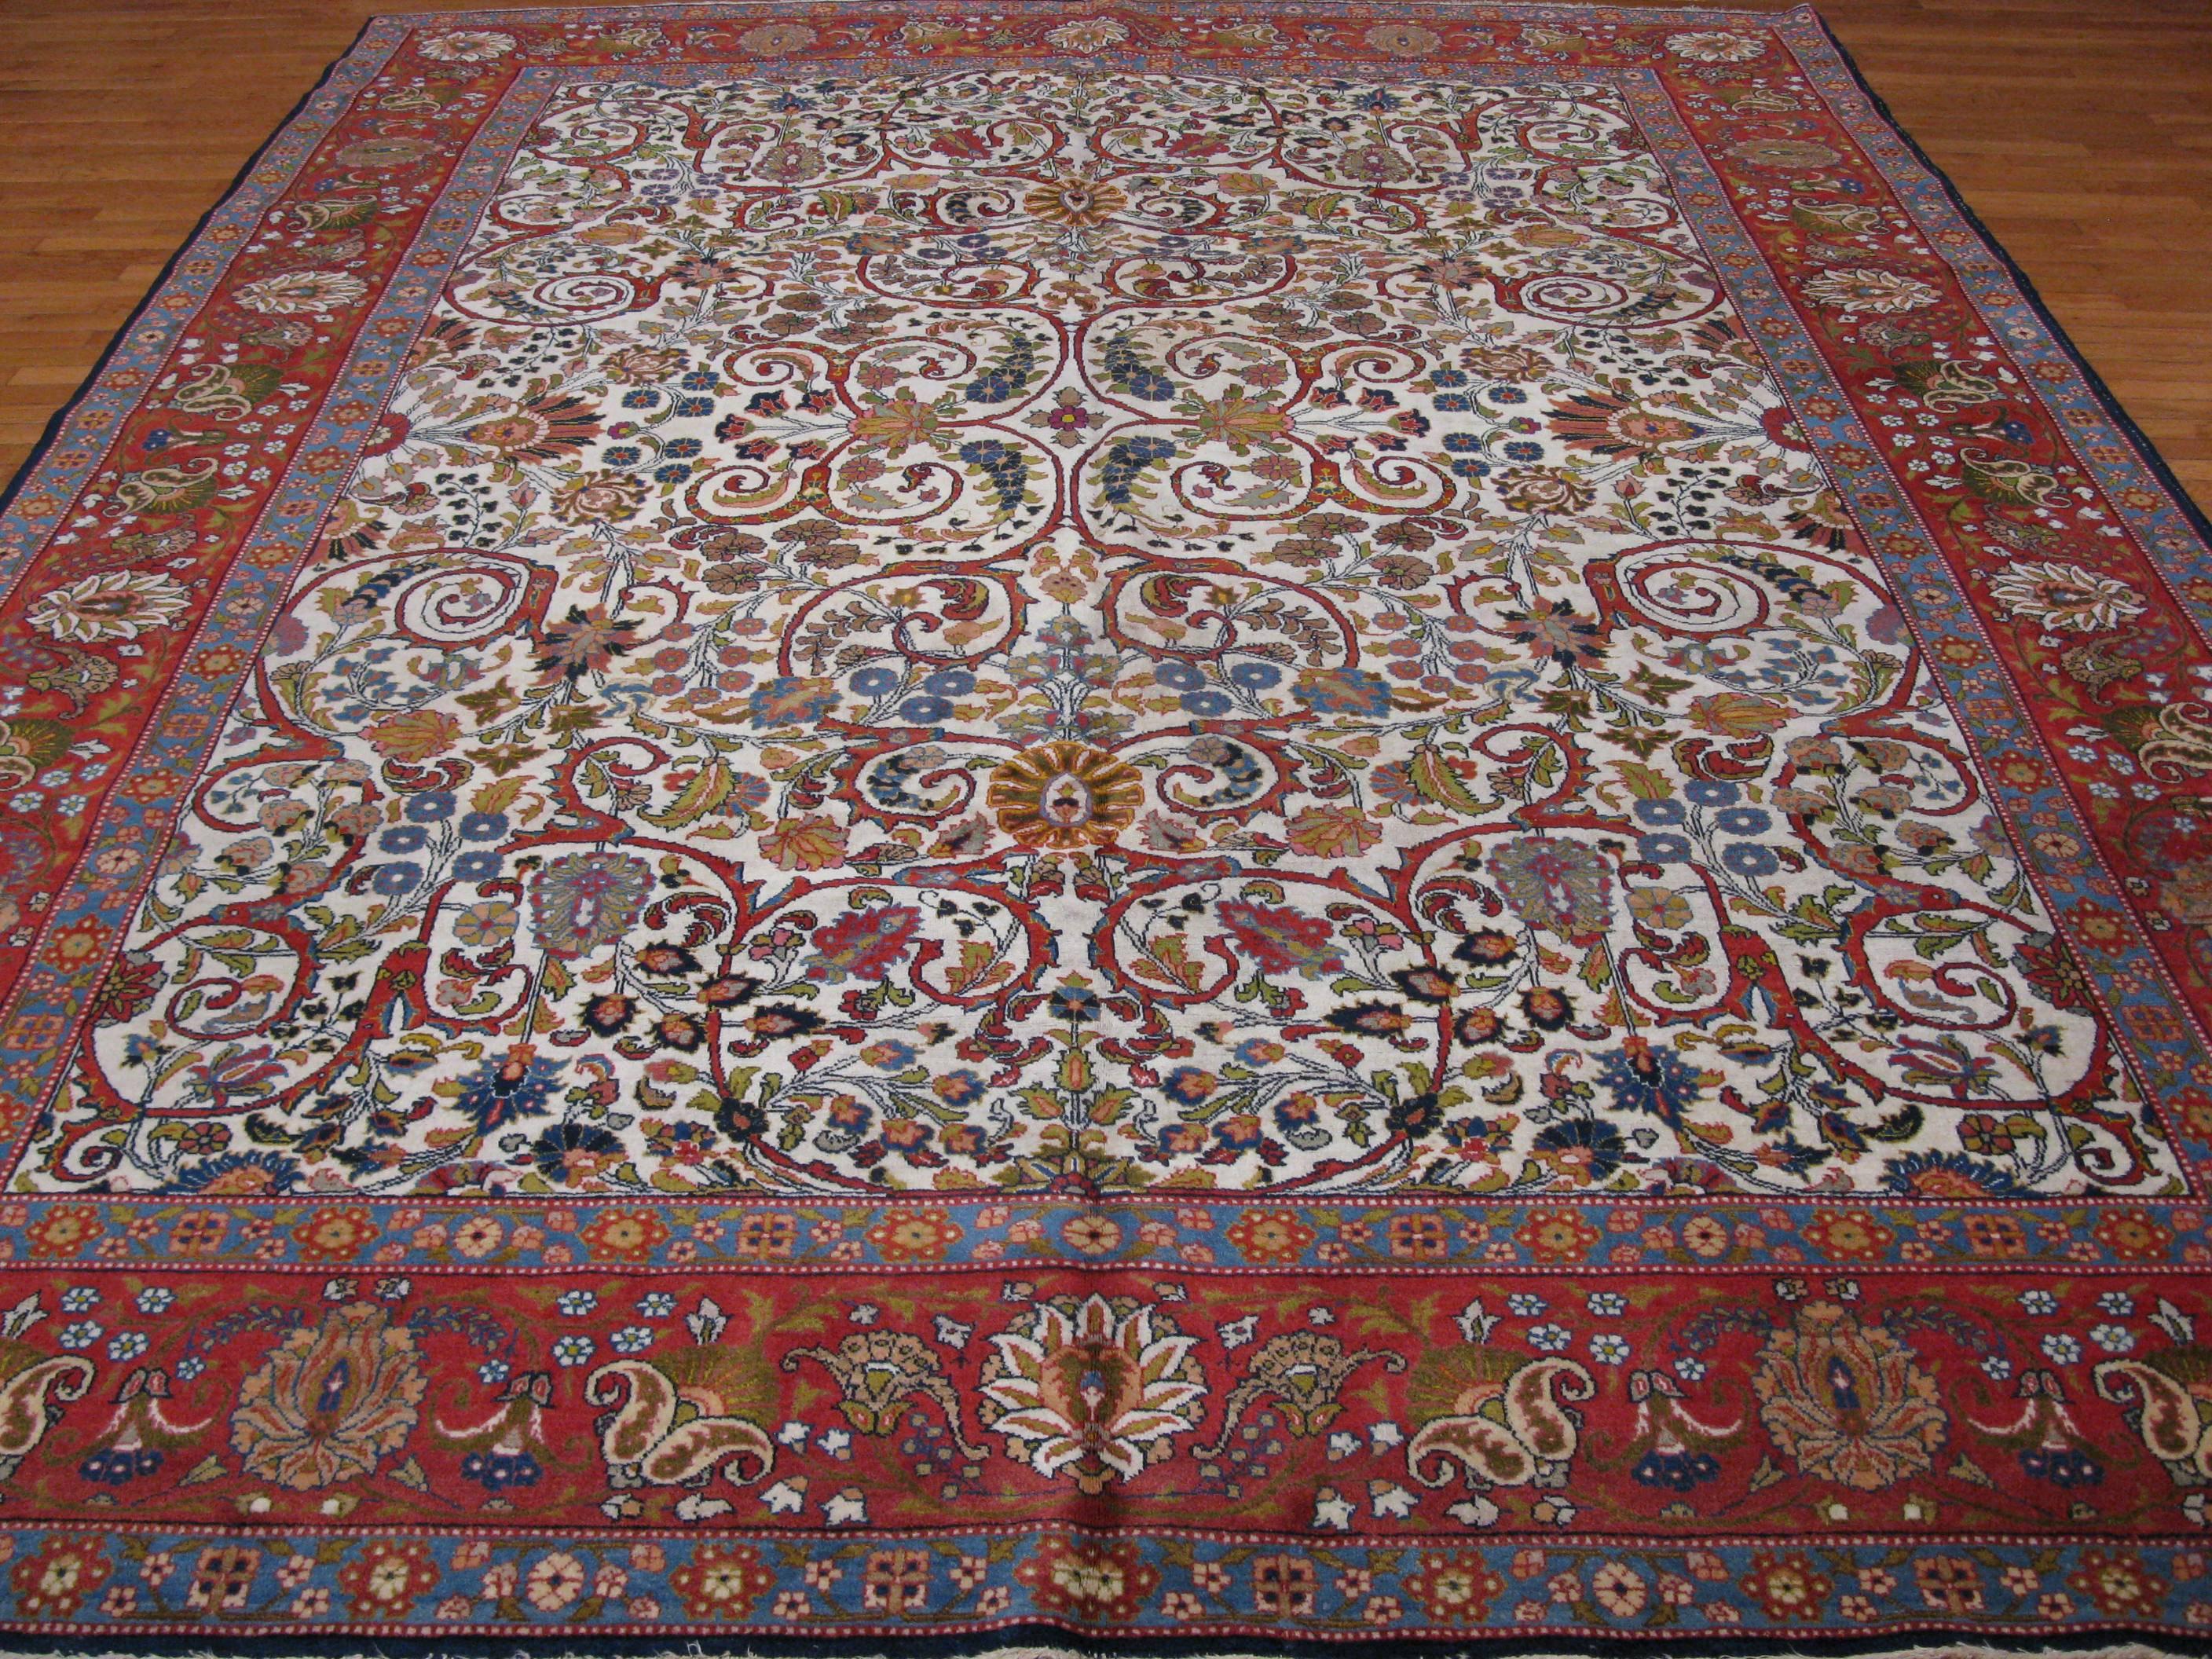 This is an elegant hand-knotted room size antique Persian Tabriz rug. It has a detailed floral pattern handmade with all natural dyed wool pile and cotton foundation. It measures 9' x 11' 8